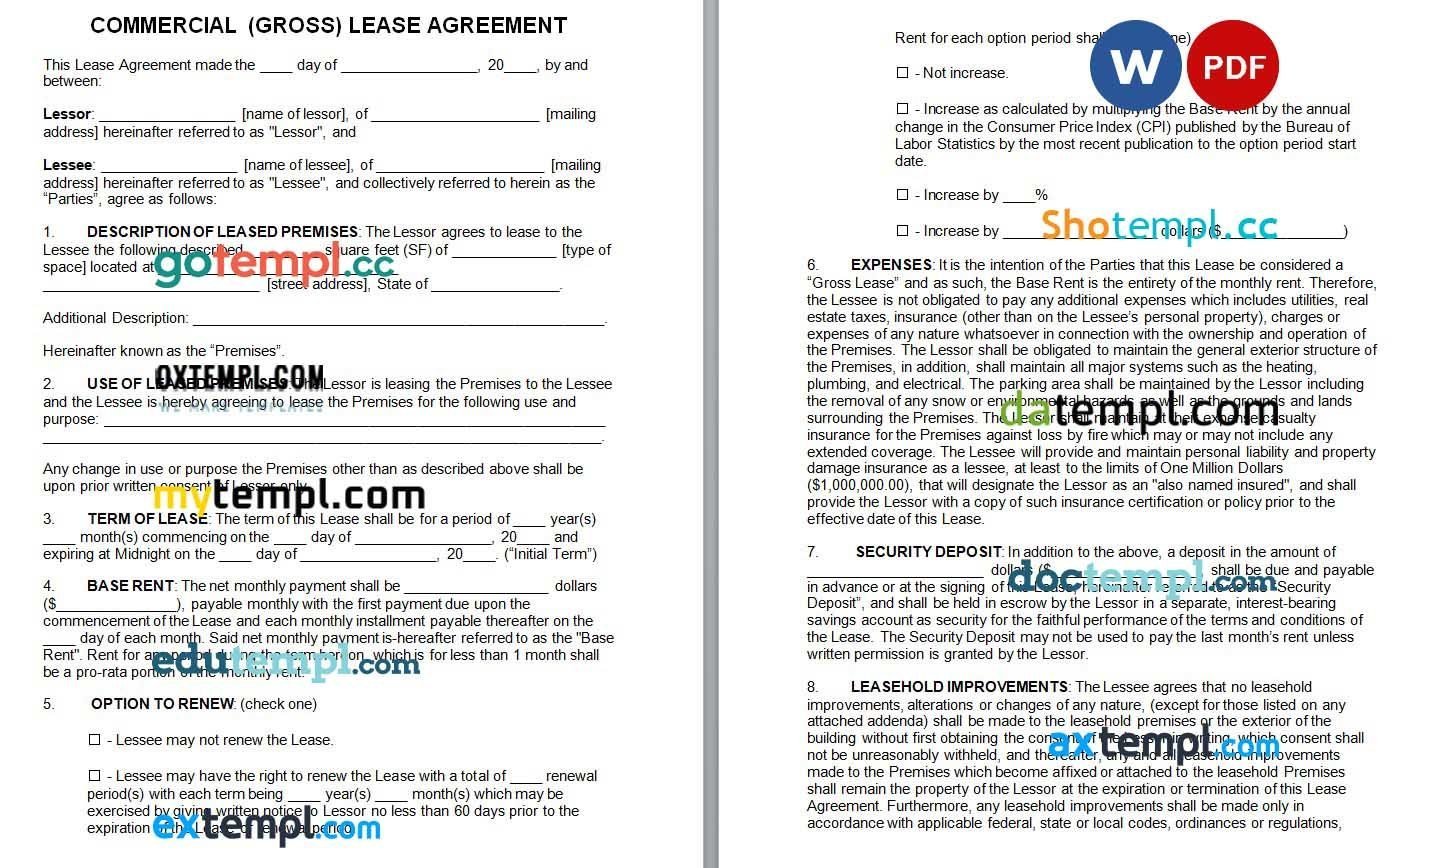 Commercial Gross Lease Agreement Word example, fully editable